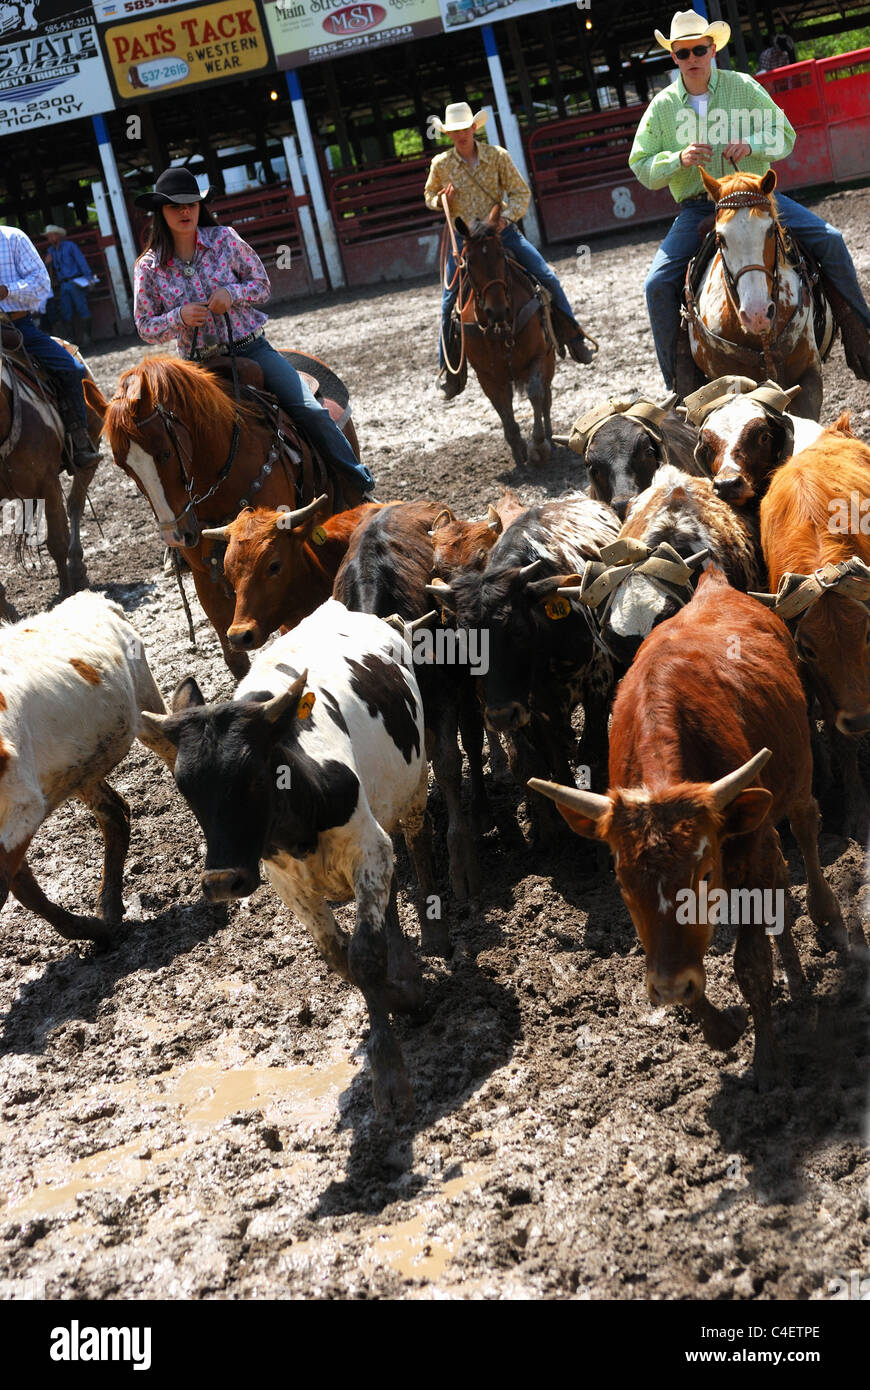 Rodeo staff move cattle to end of arena. Stock Photo